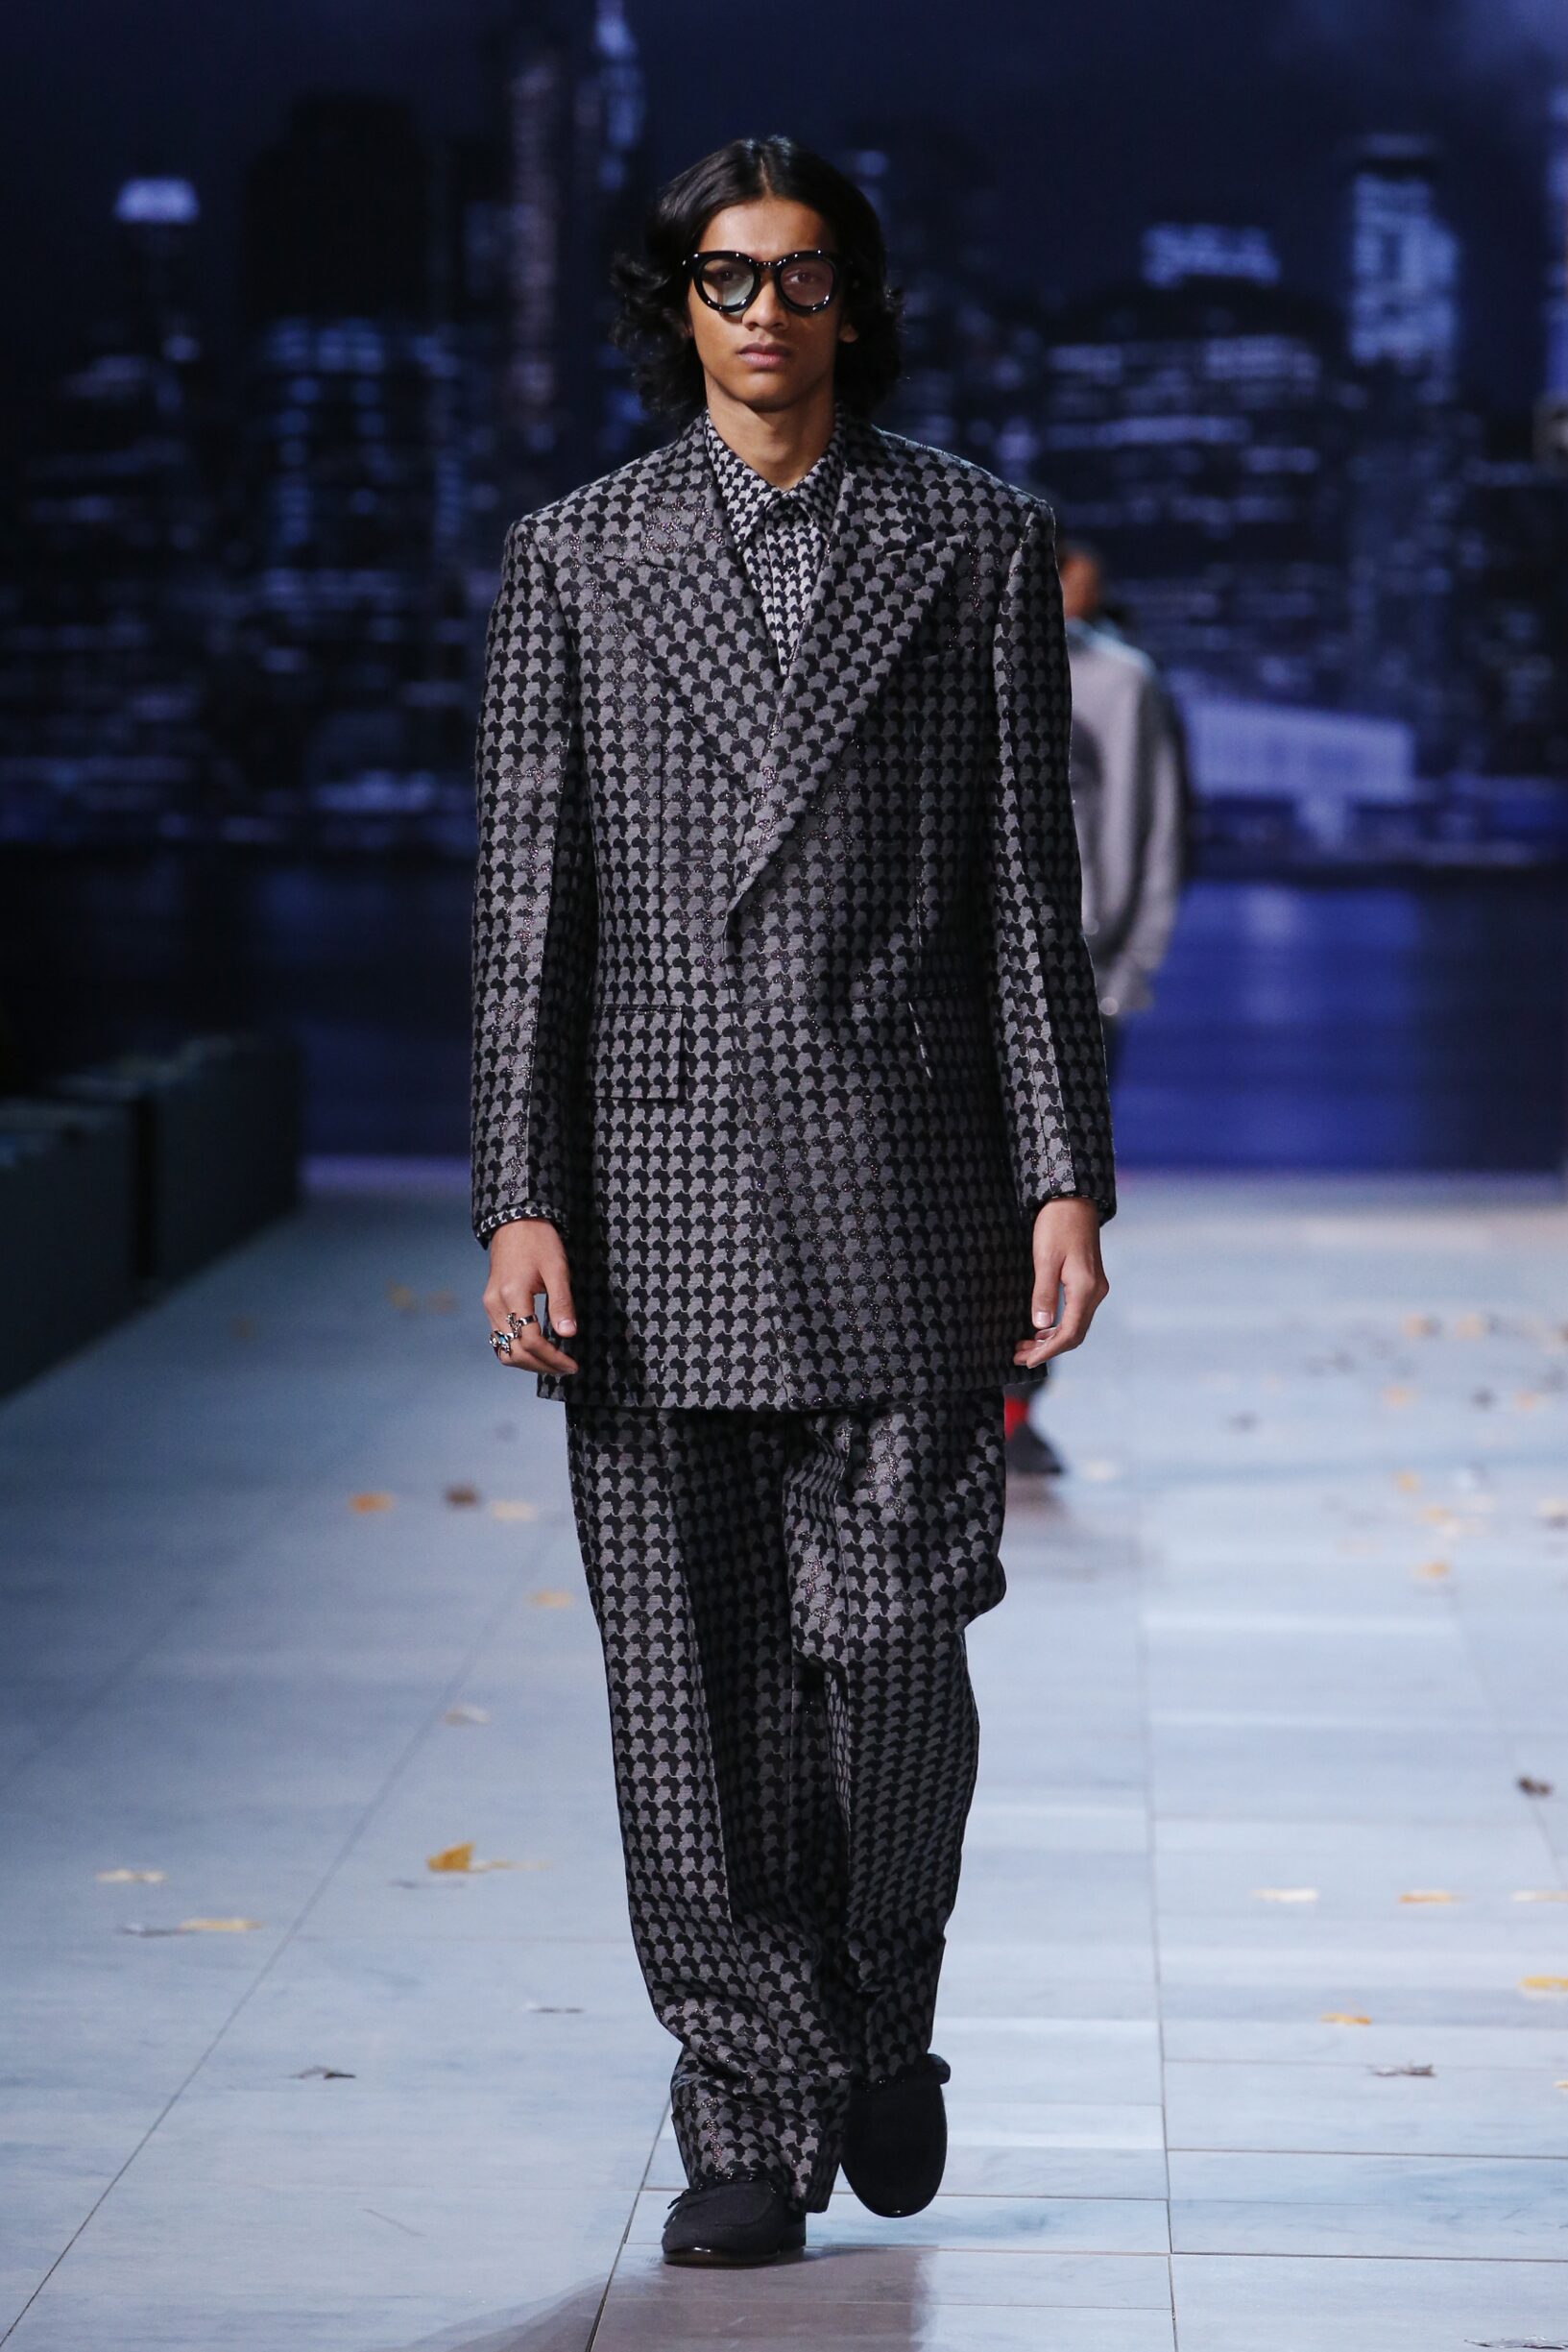 LOUIS VUITTON FALL WINTER 2019 MEN’S COLLECTION | The Skinny Beep